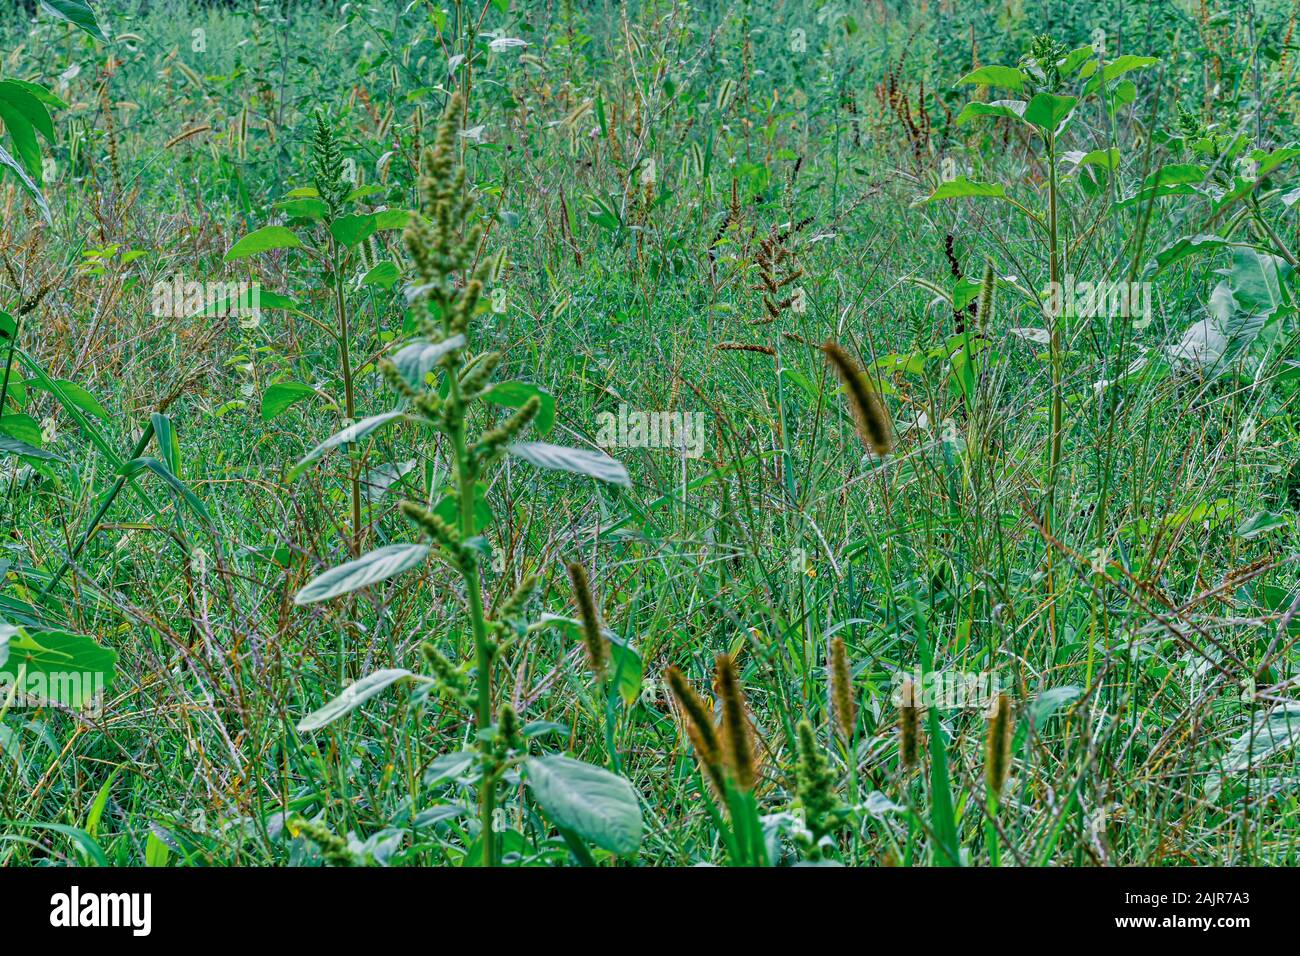 grassy land of Poaceae or Gramineae for pasture field and livestock forage production,hdr image Stock Photo